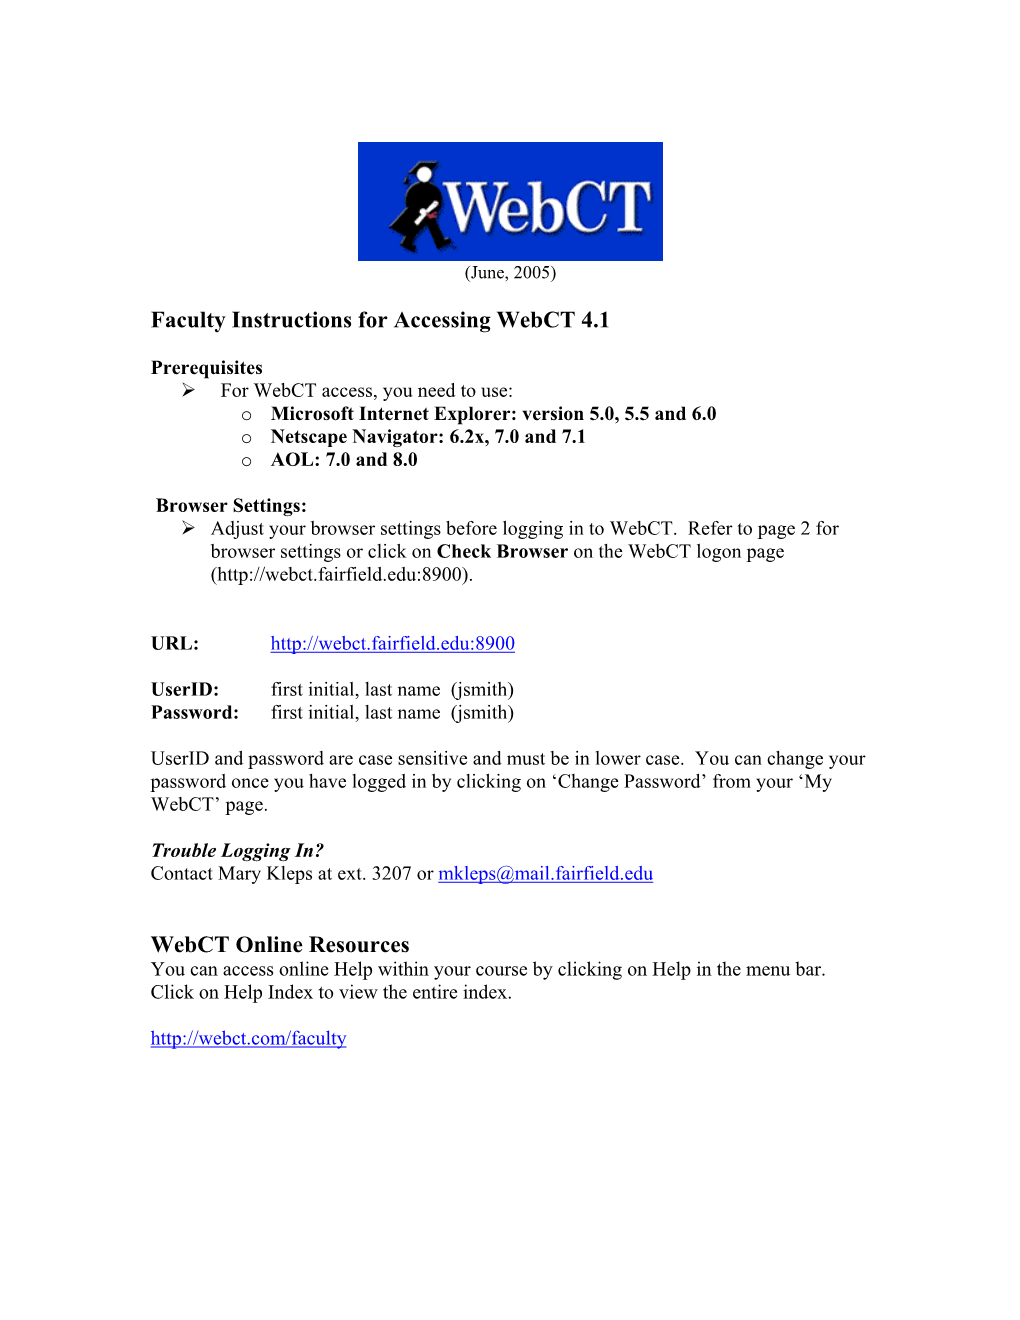 Accessing Webct 4.1